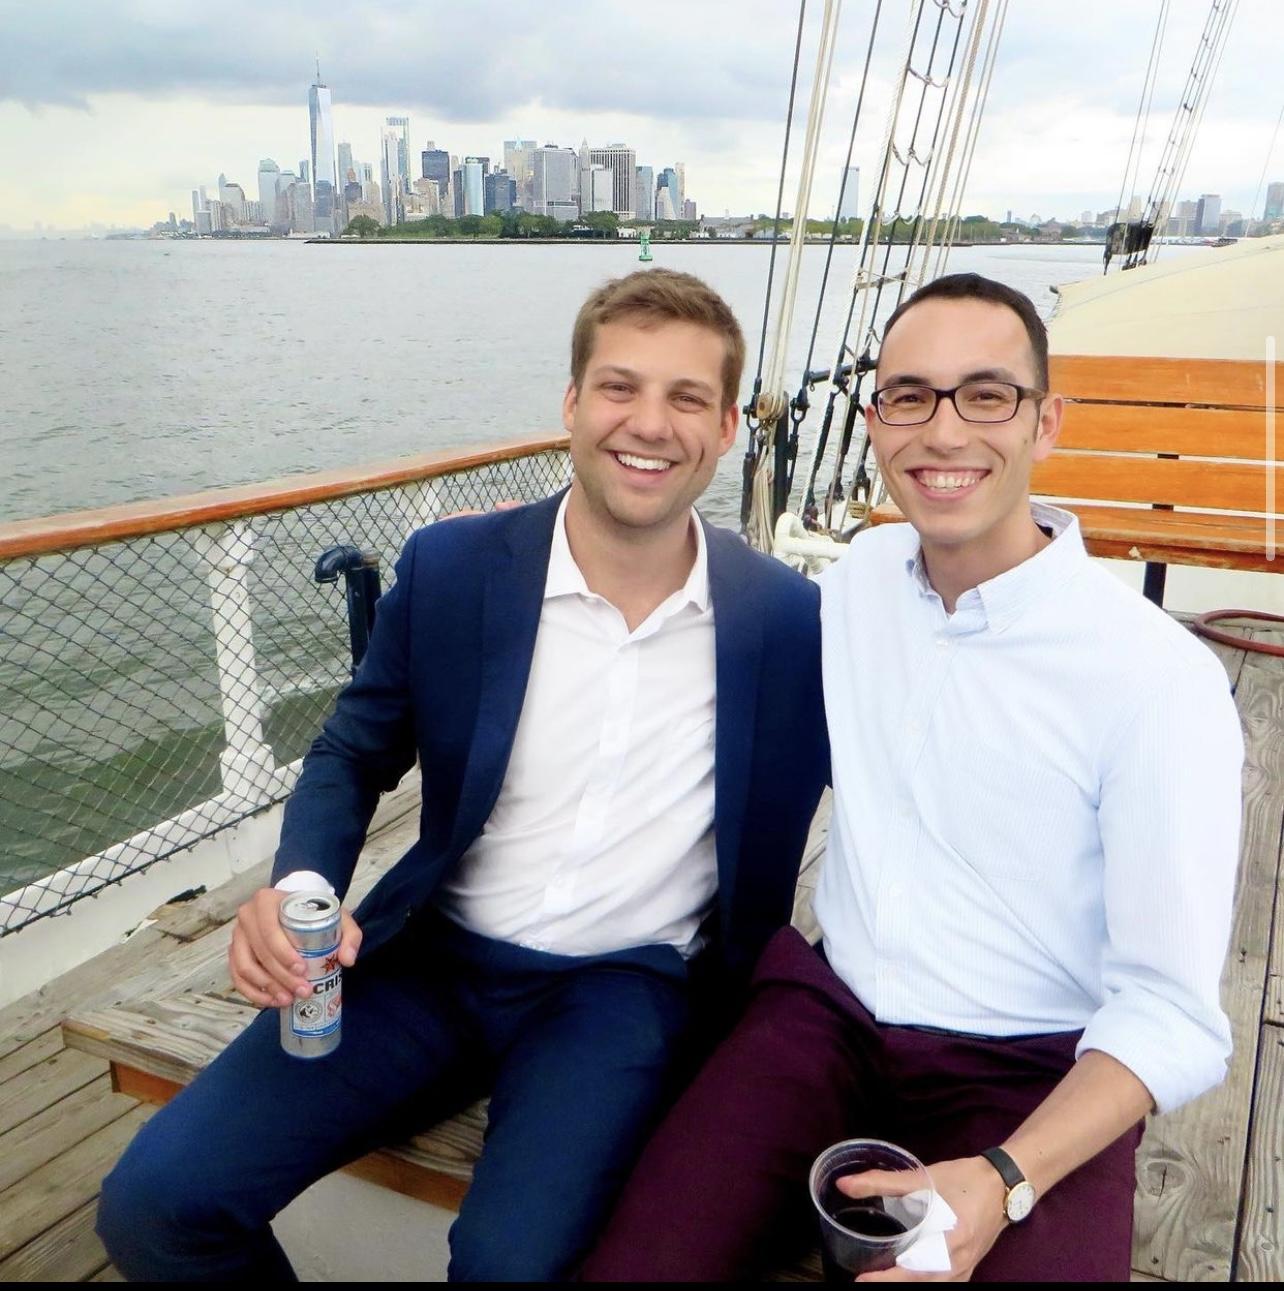 2 men on a boat tour of New York harbor